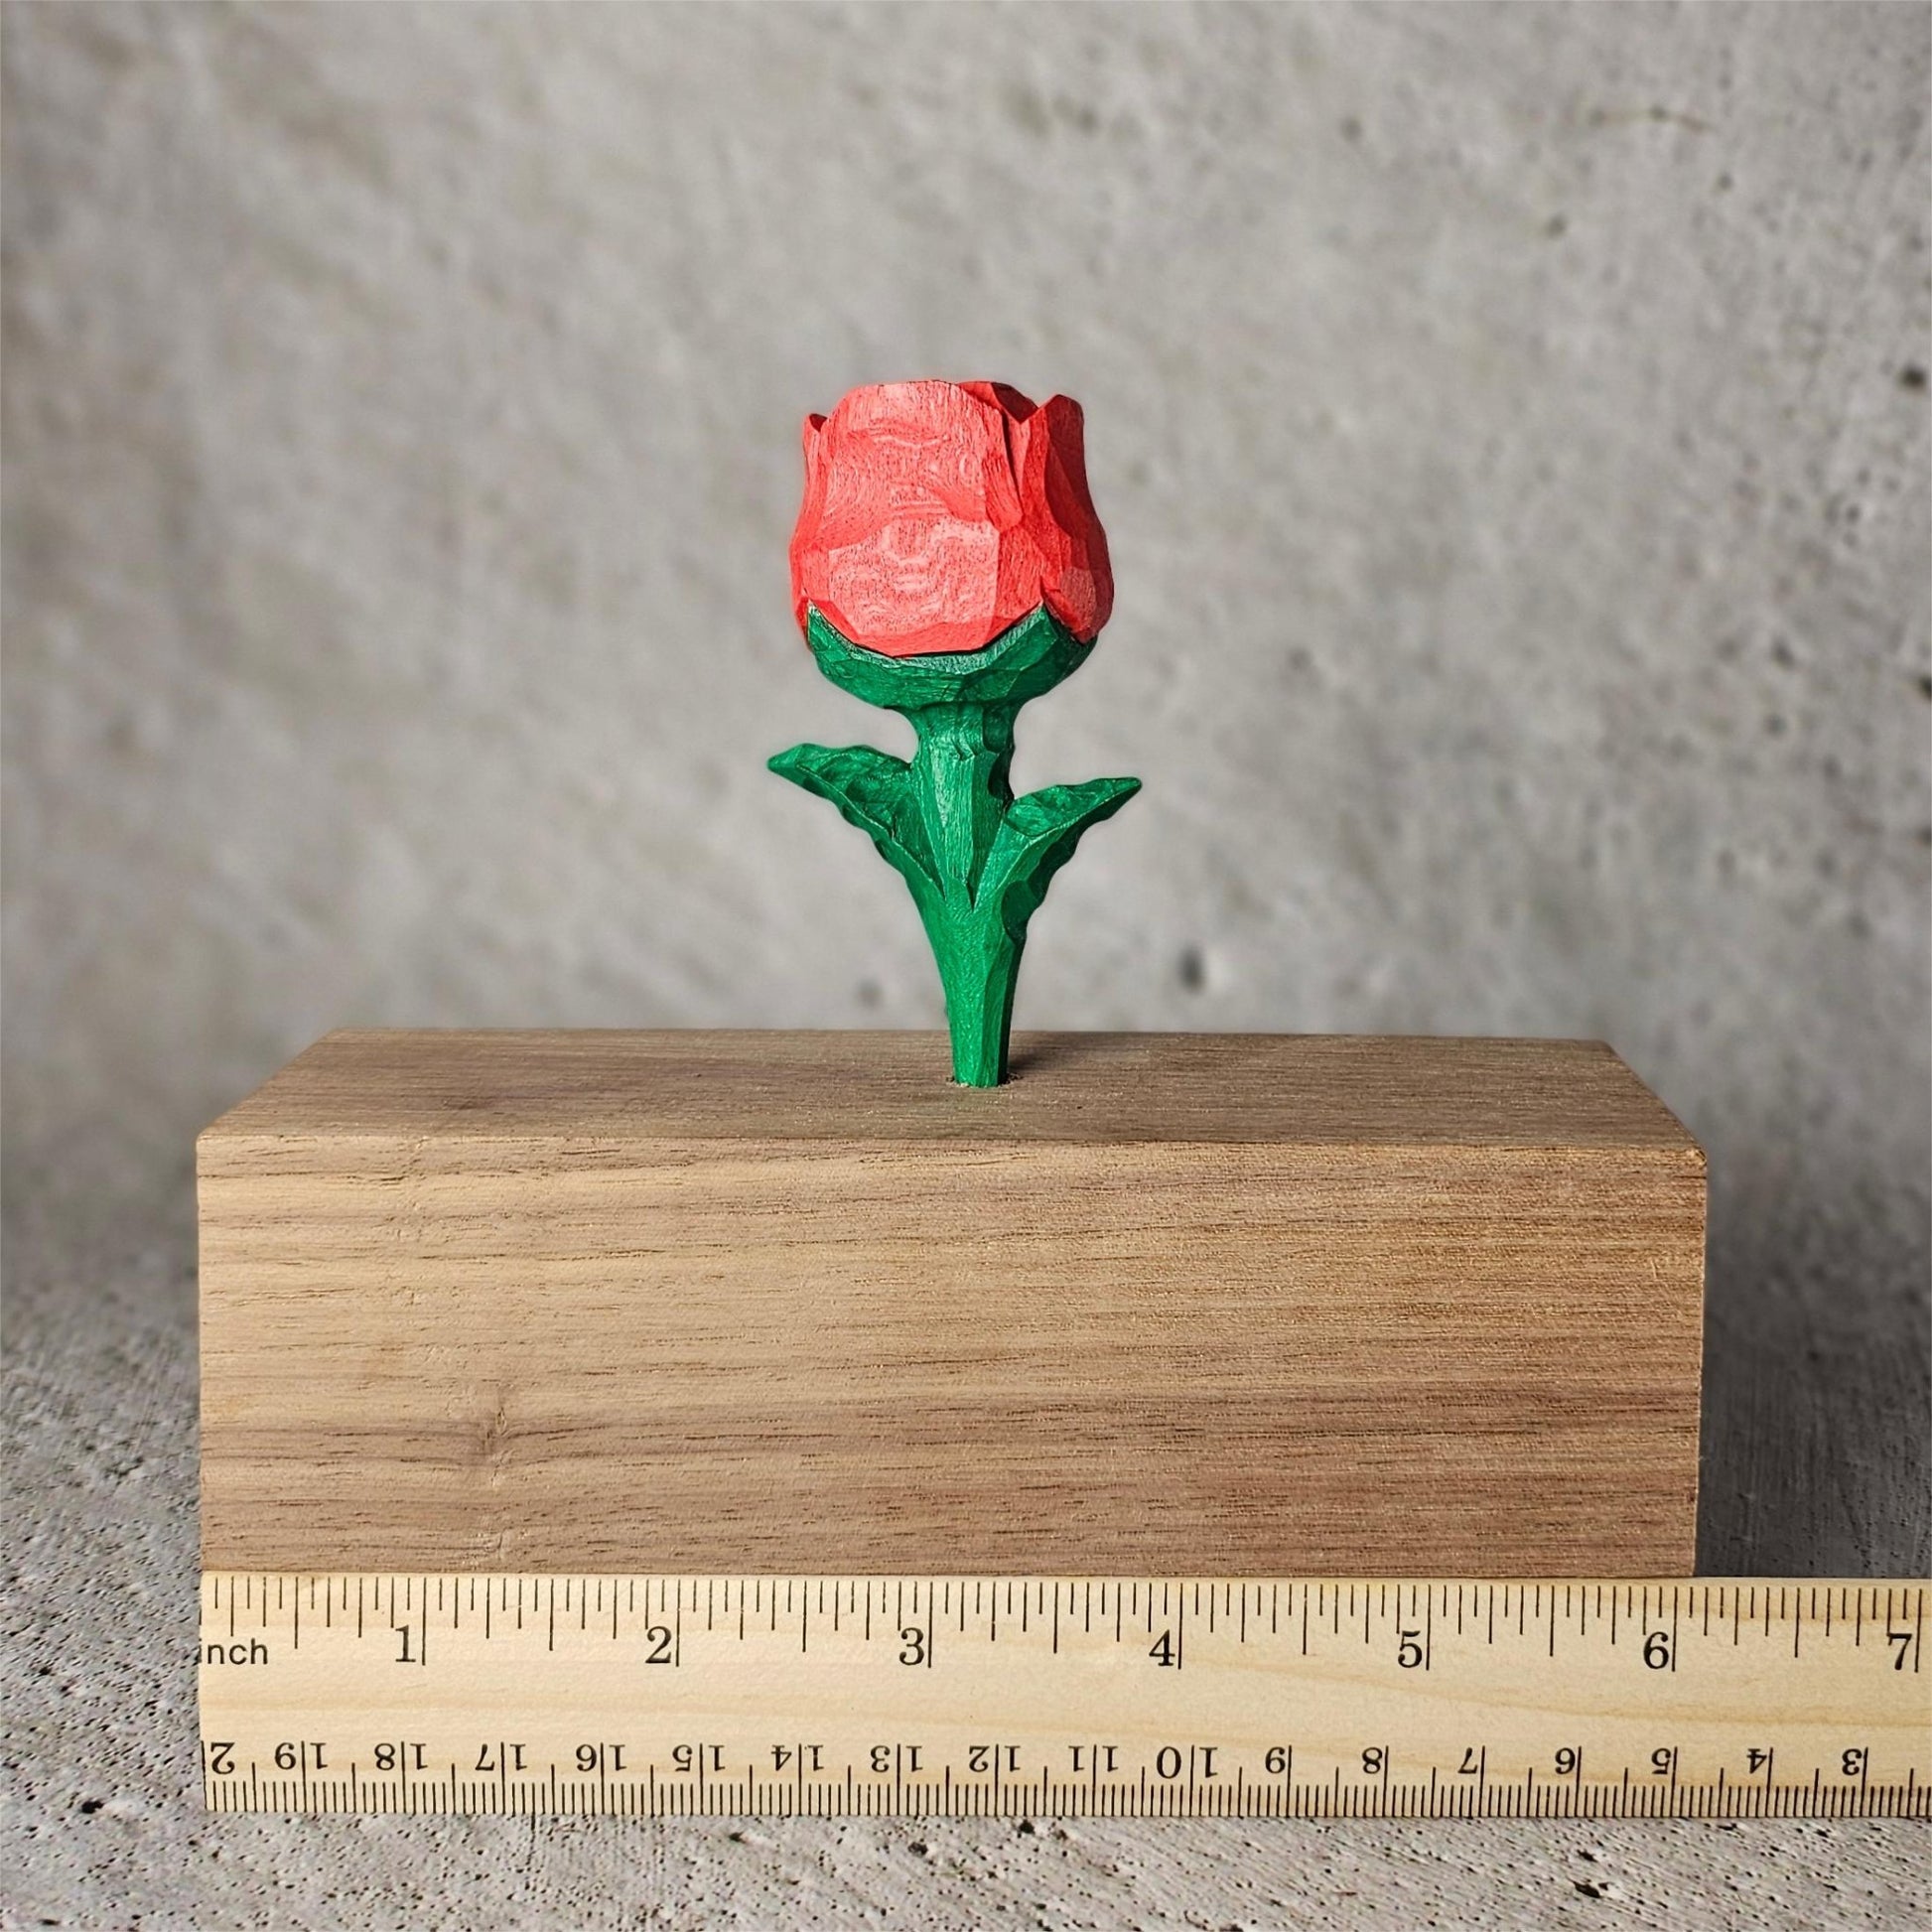 Dual-Hole 6" Wooden Display Block with Handcrafted Rose - Wooden Islands